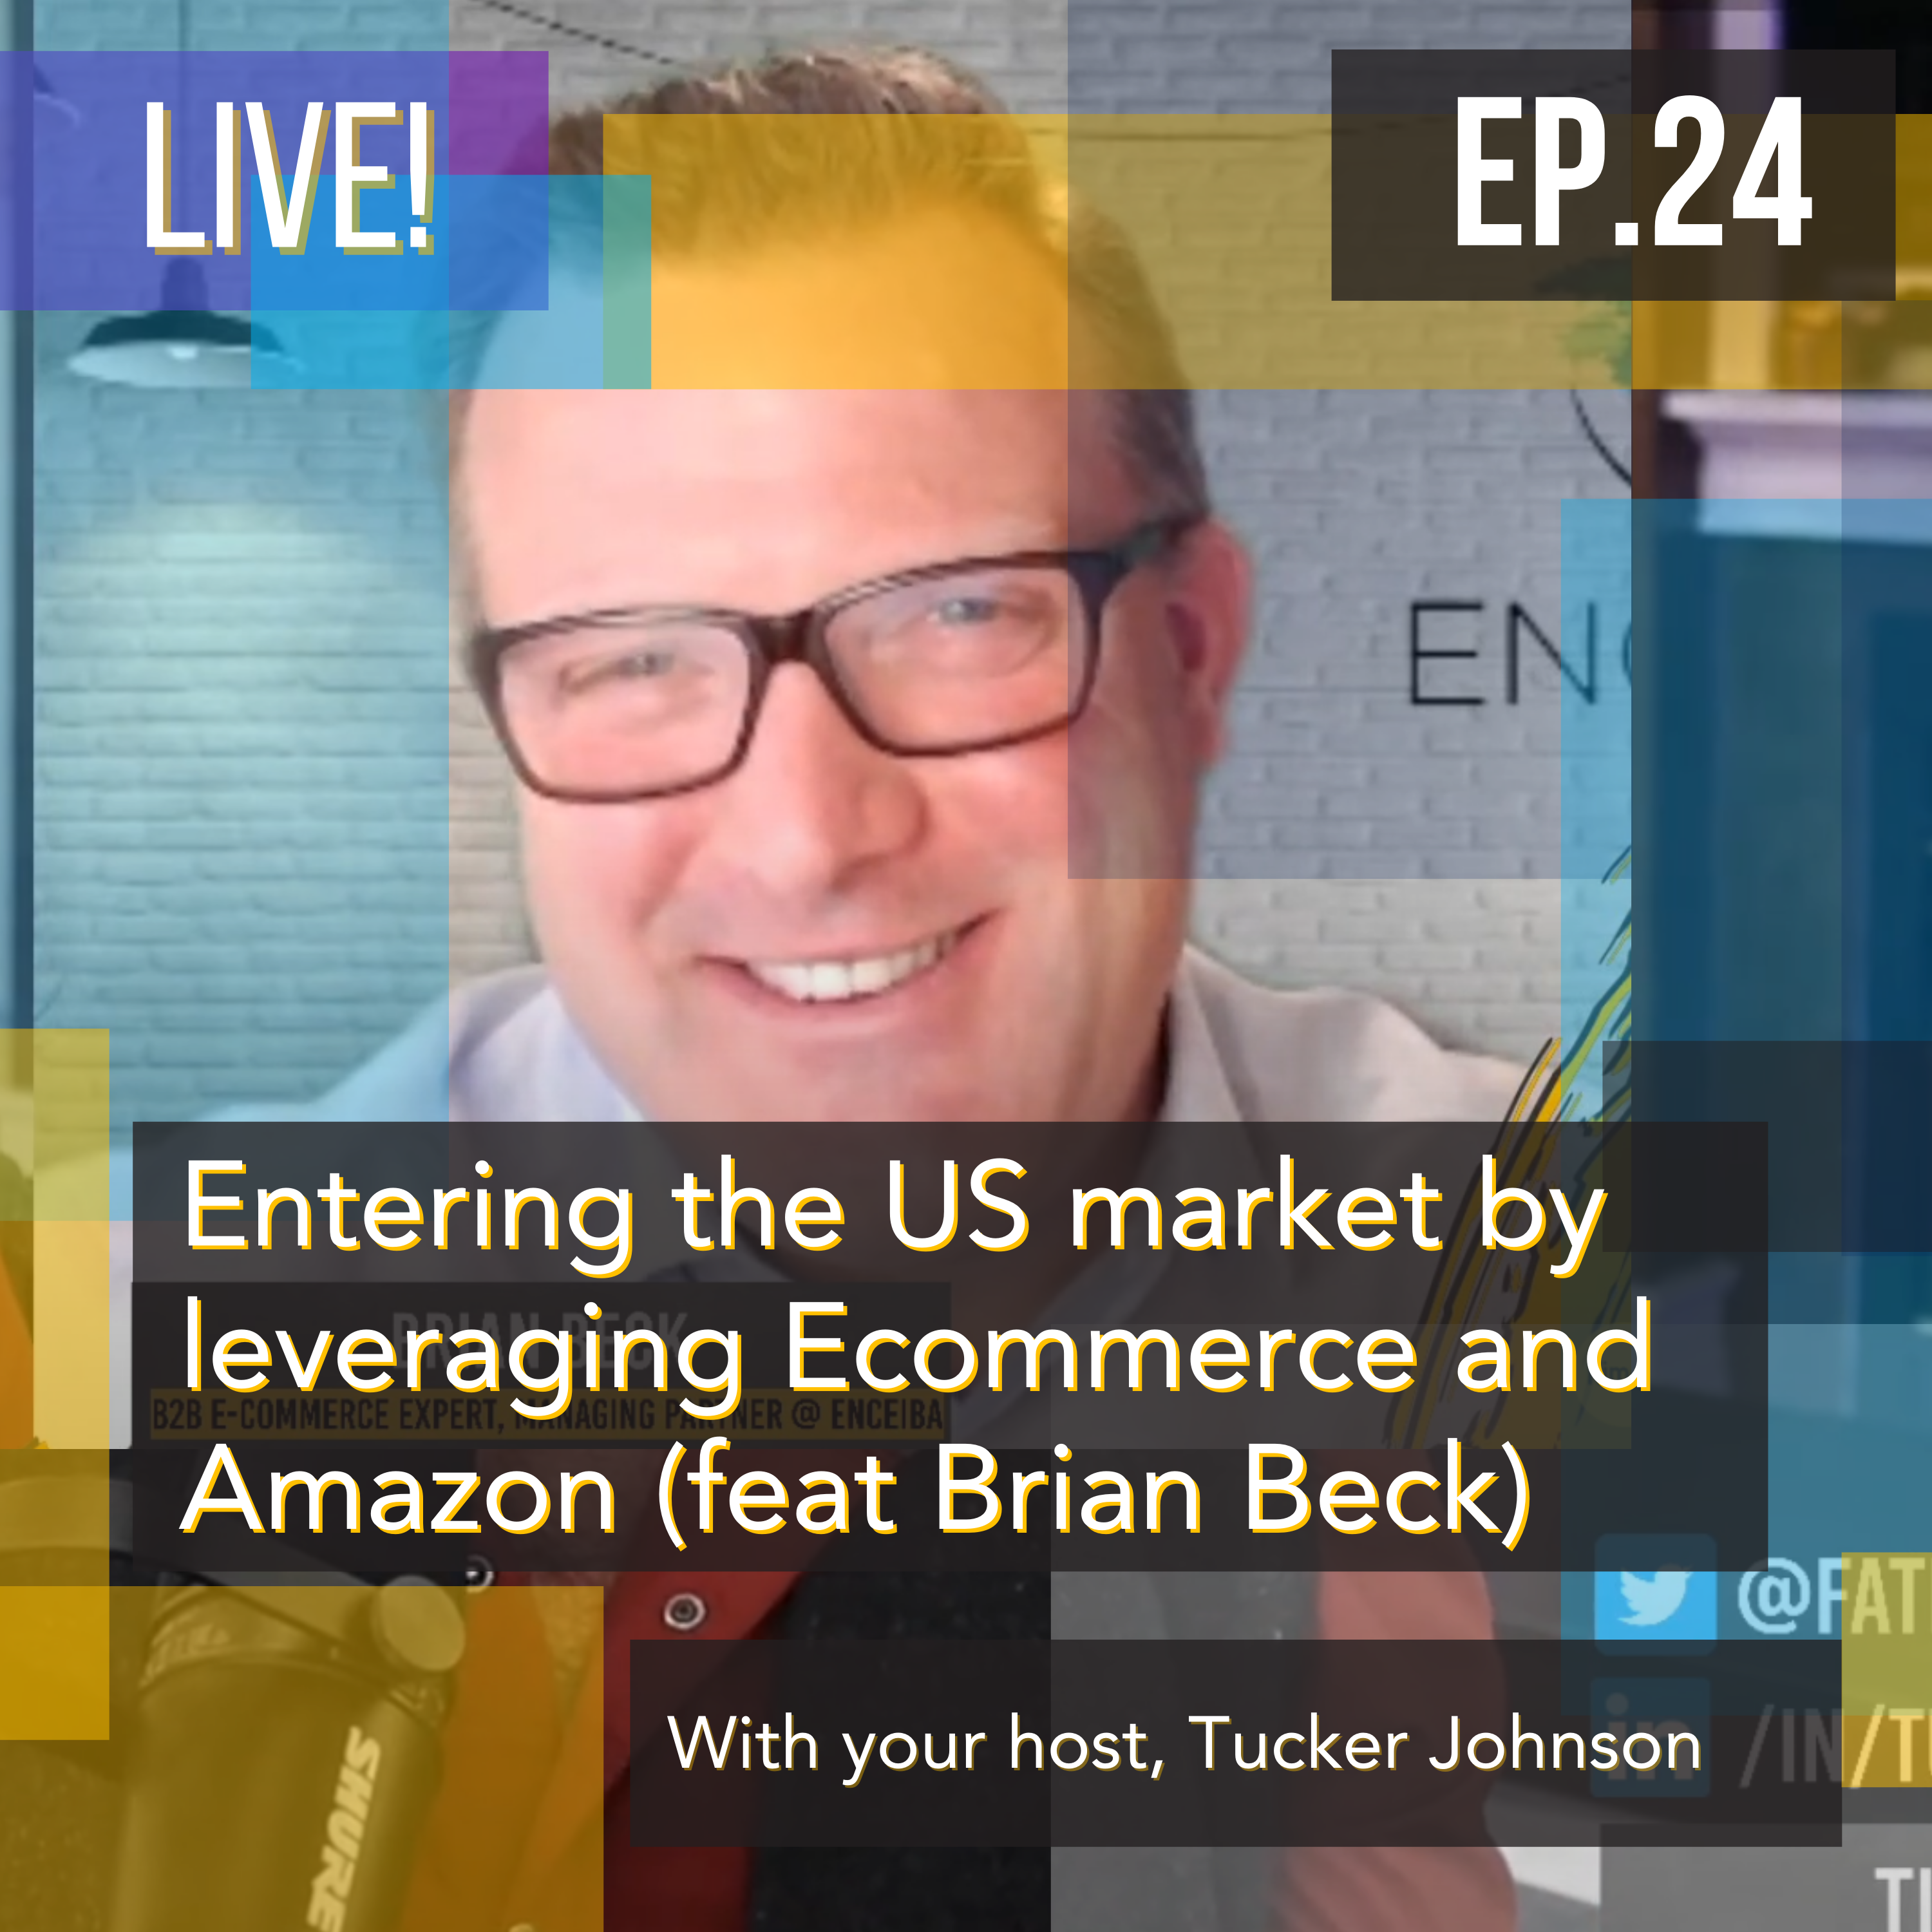 Entering the US market by leveraging Ecommerce and Amazon (feat Brian Beck)